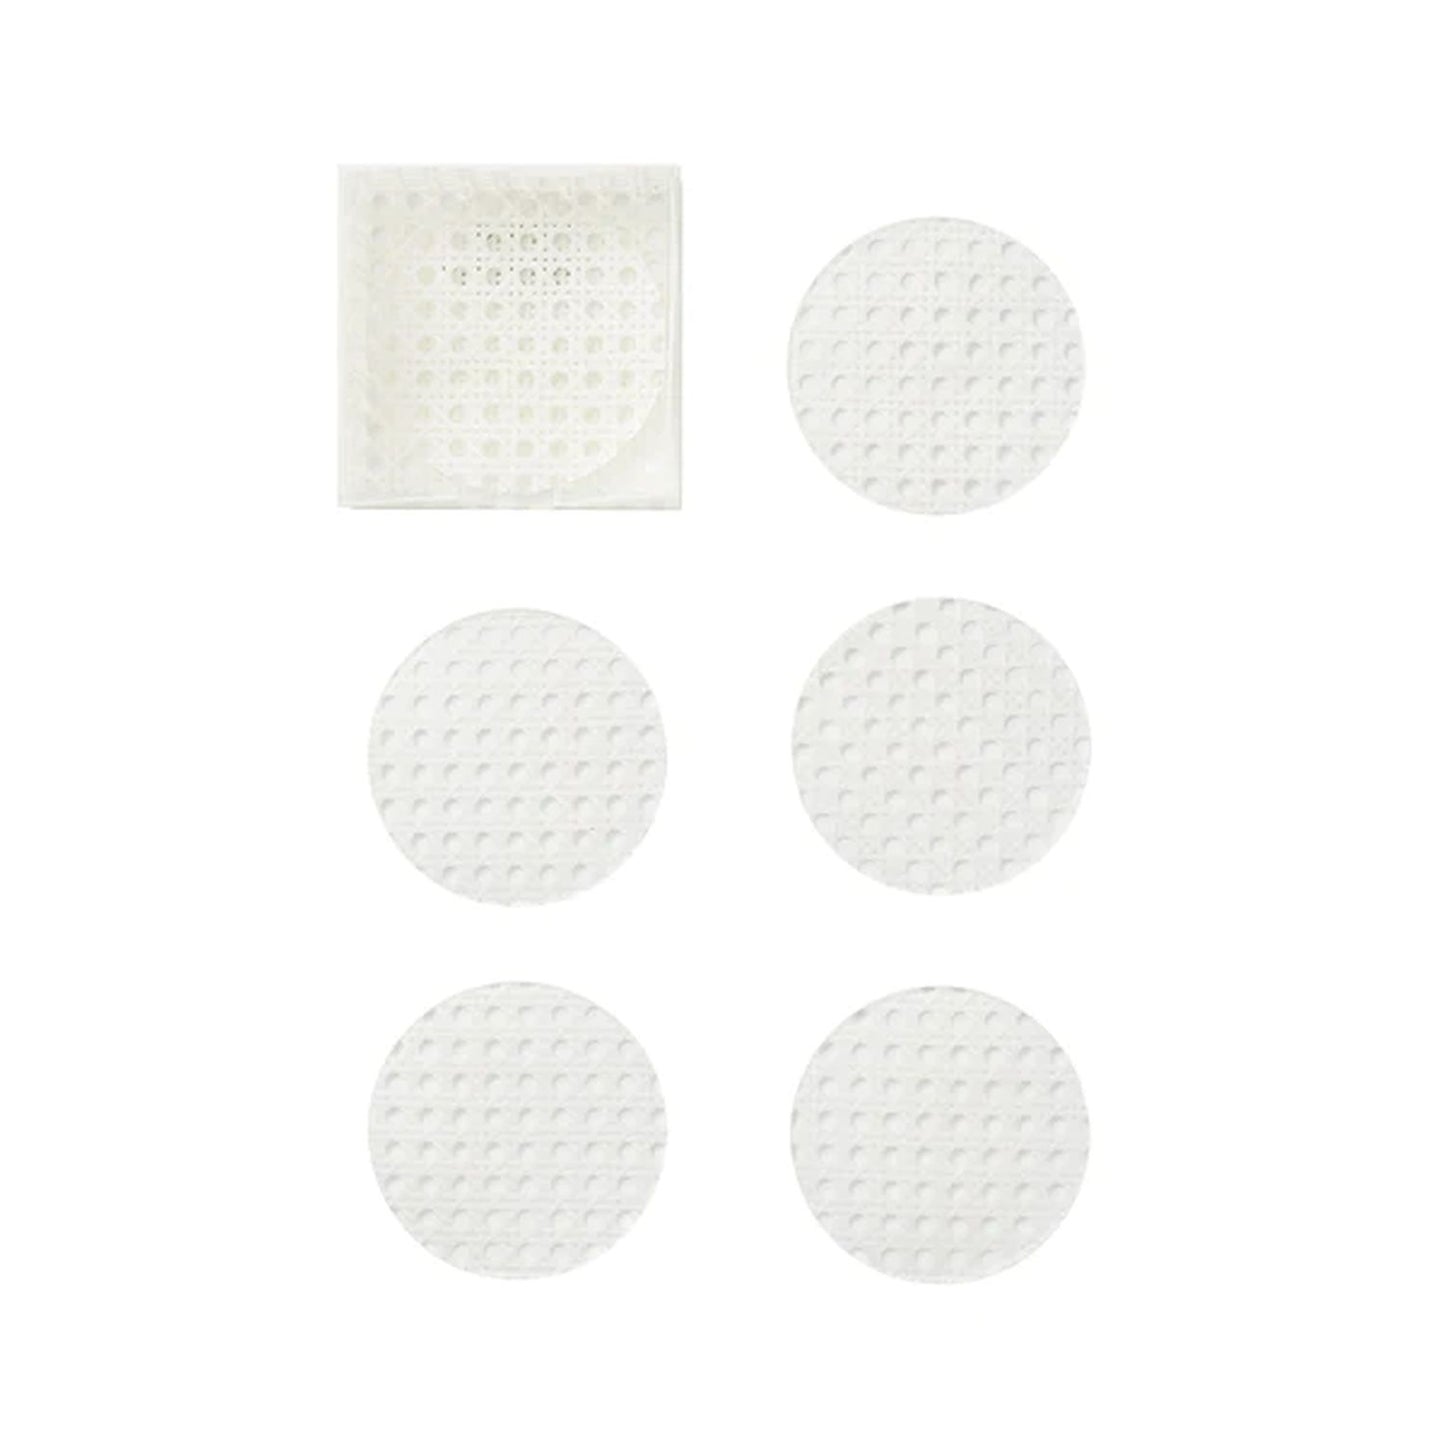 Kim Seybert Reed Coasters in White, Set of 6 in a Caddy